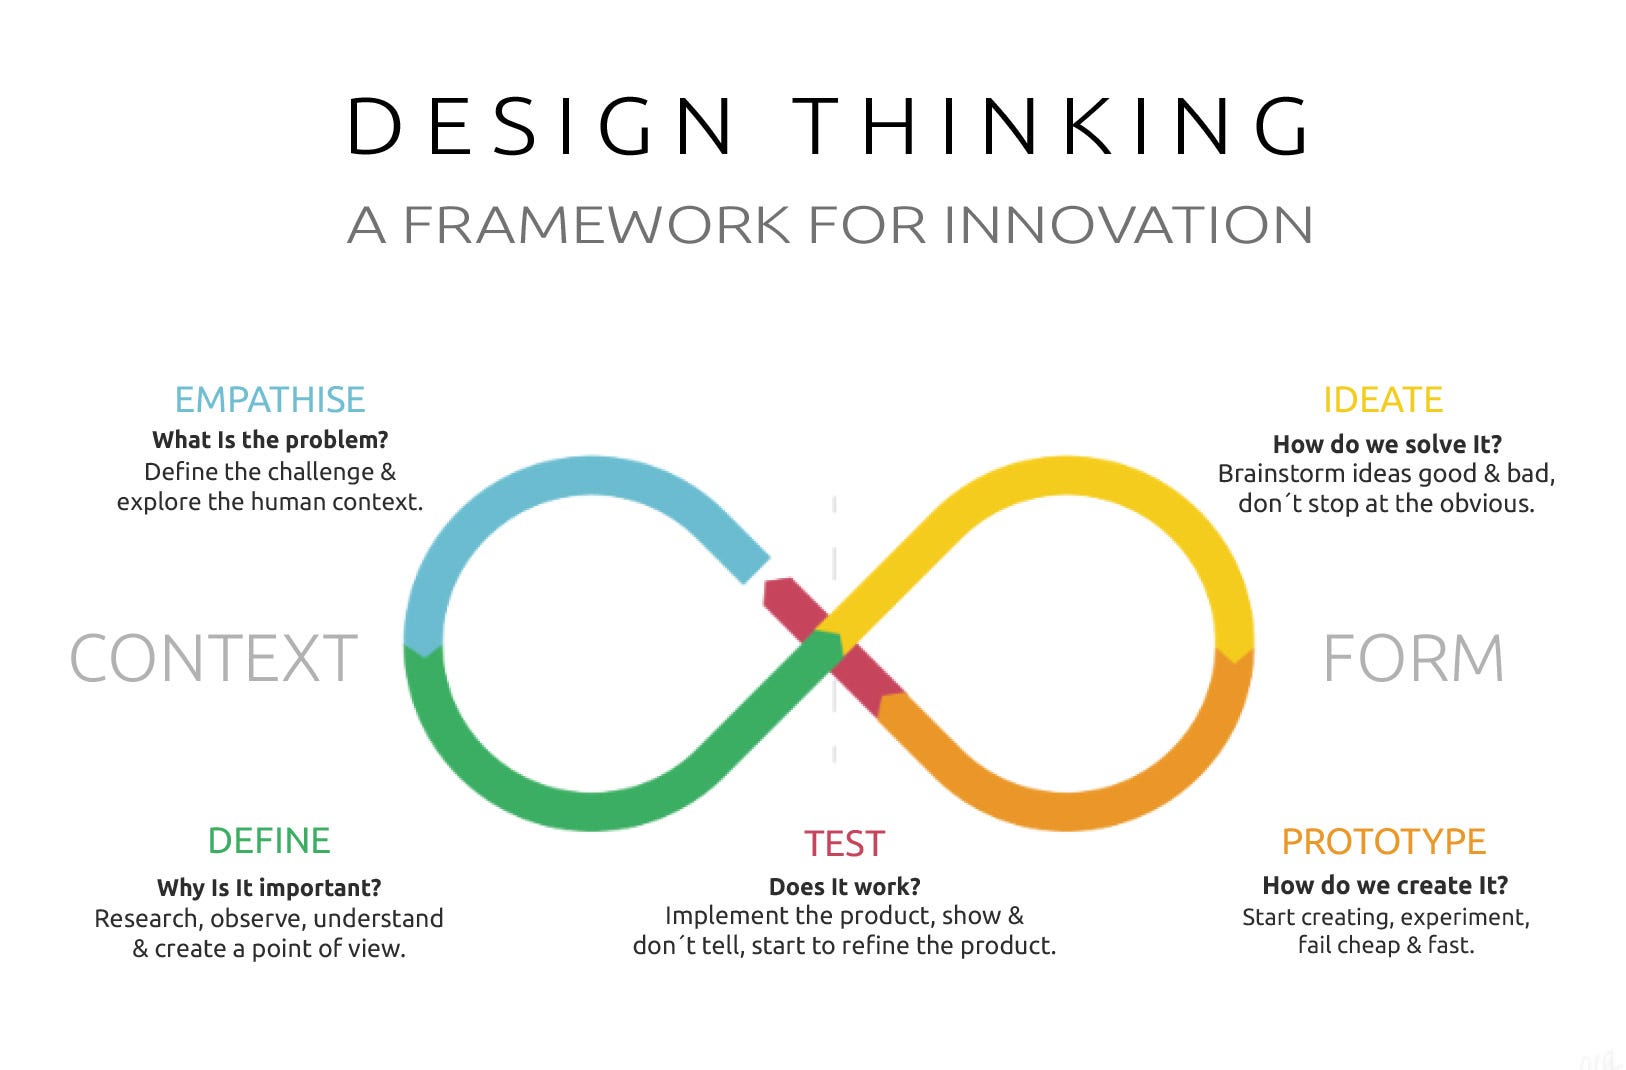 What Are The 5 Stages Of Design Thinking - Design Talk